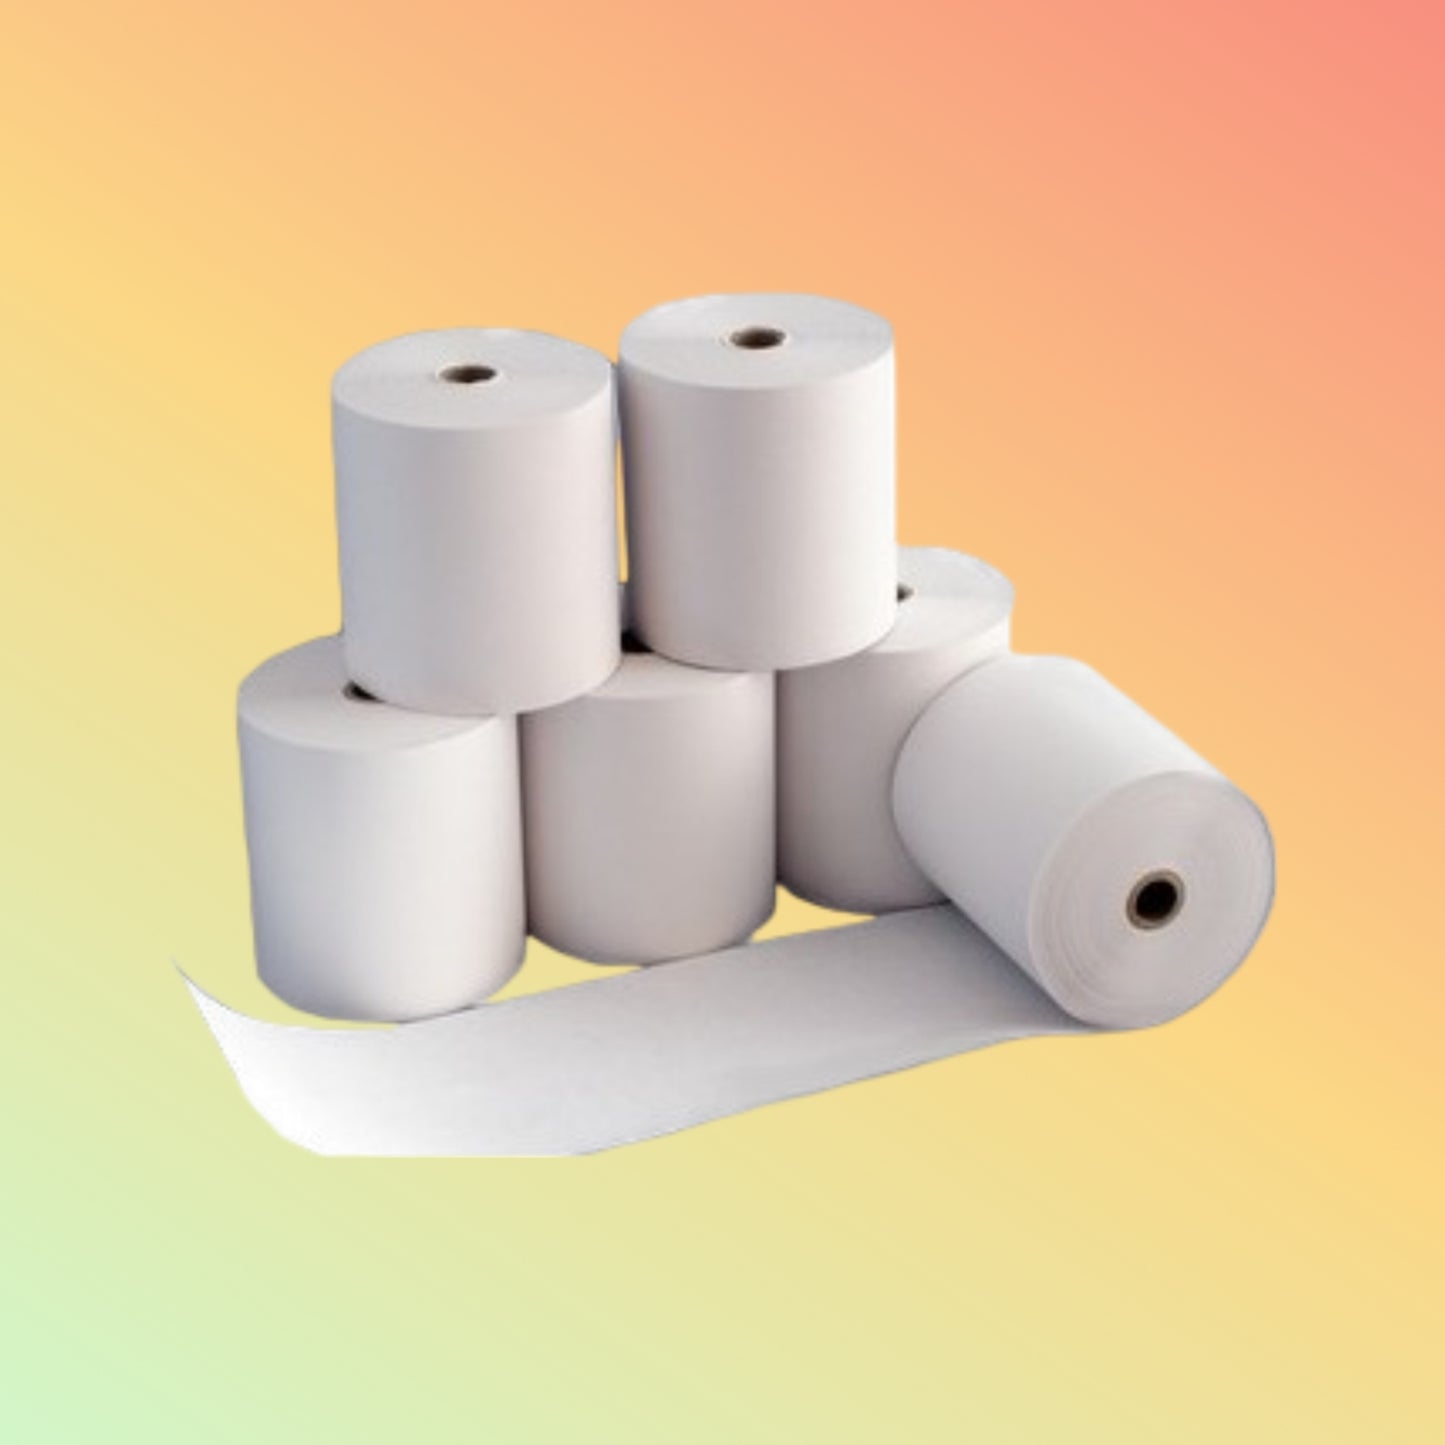 80x80mm Thermal Roll Paper: 50 Rolls for POS Systems